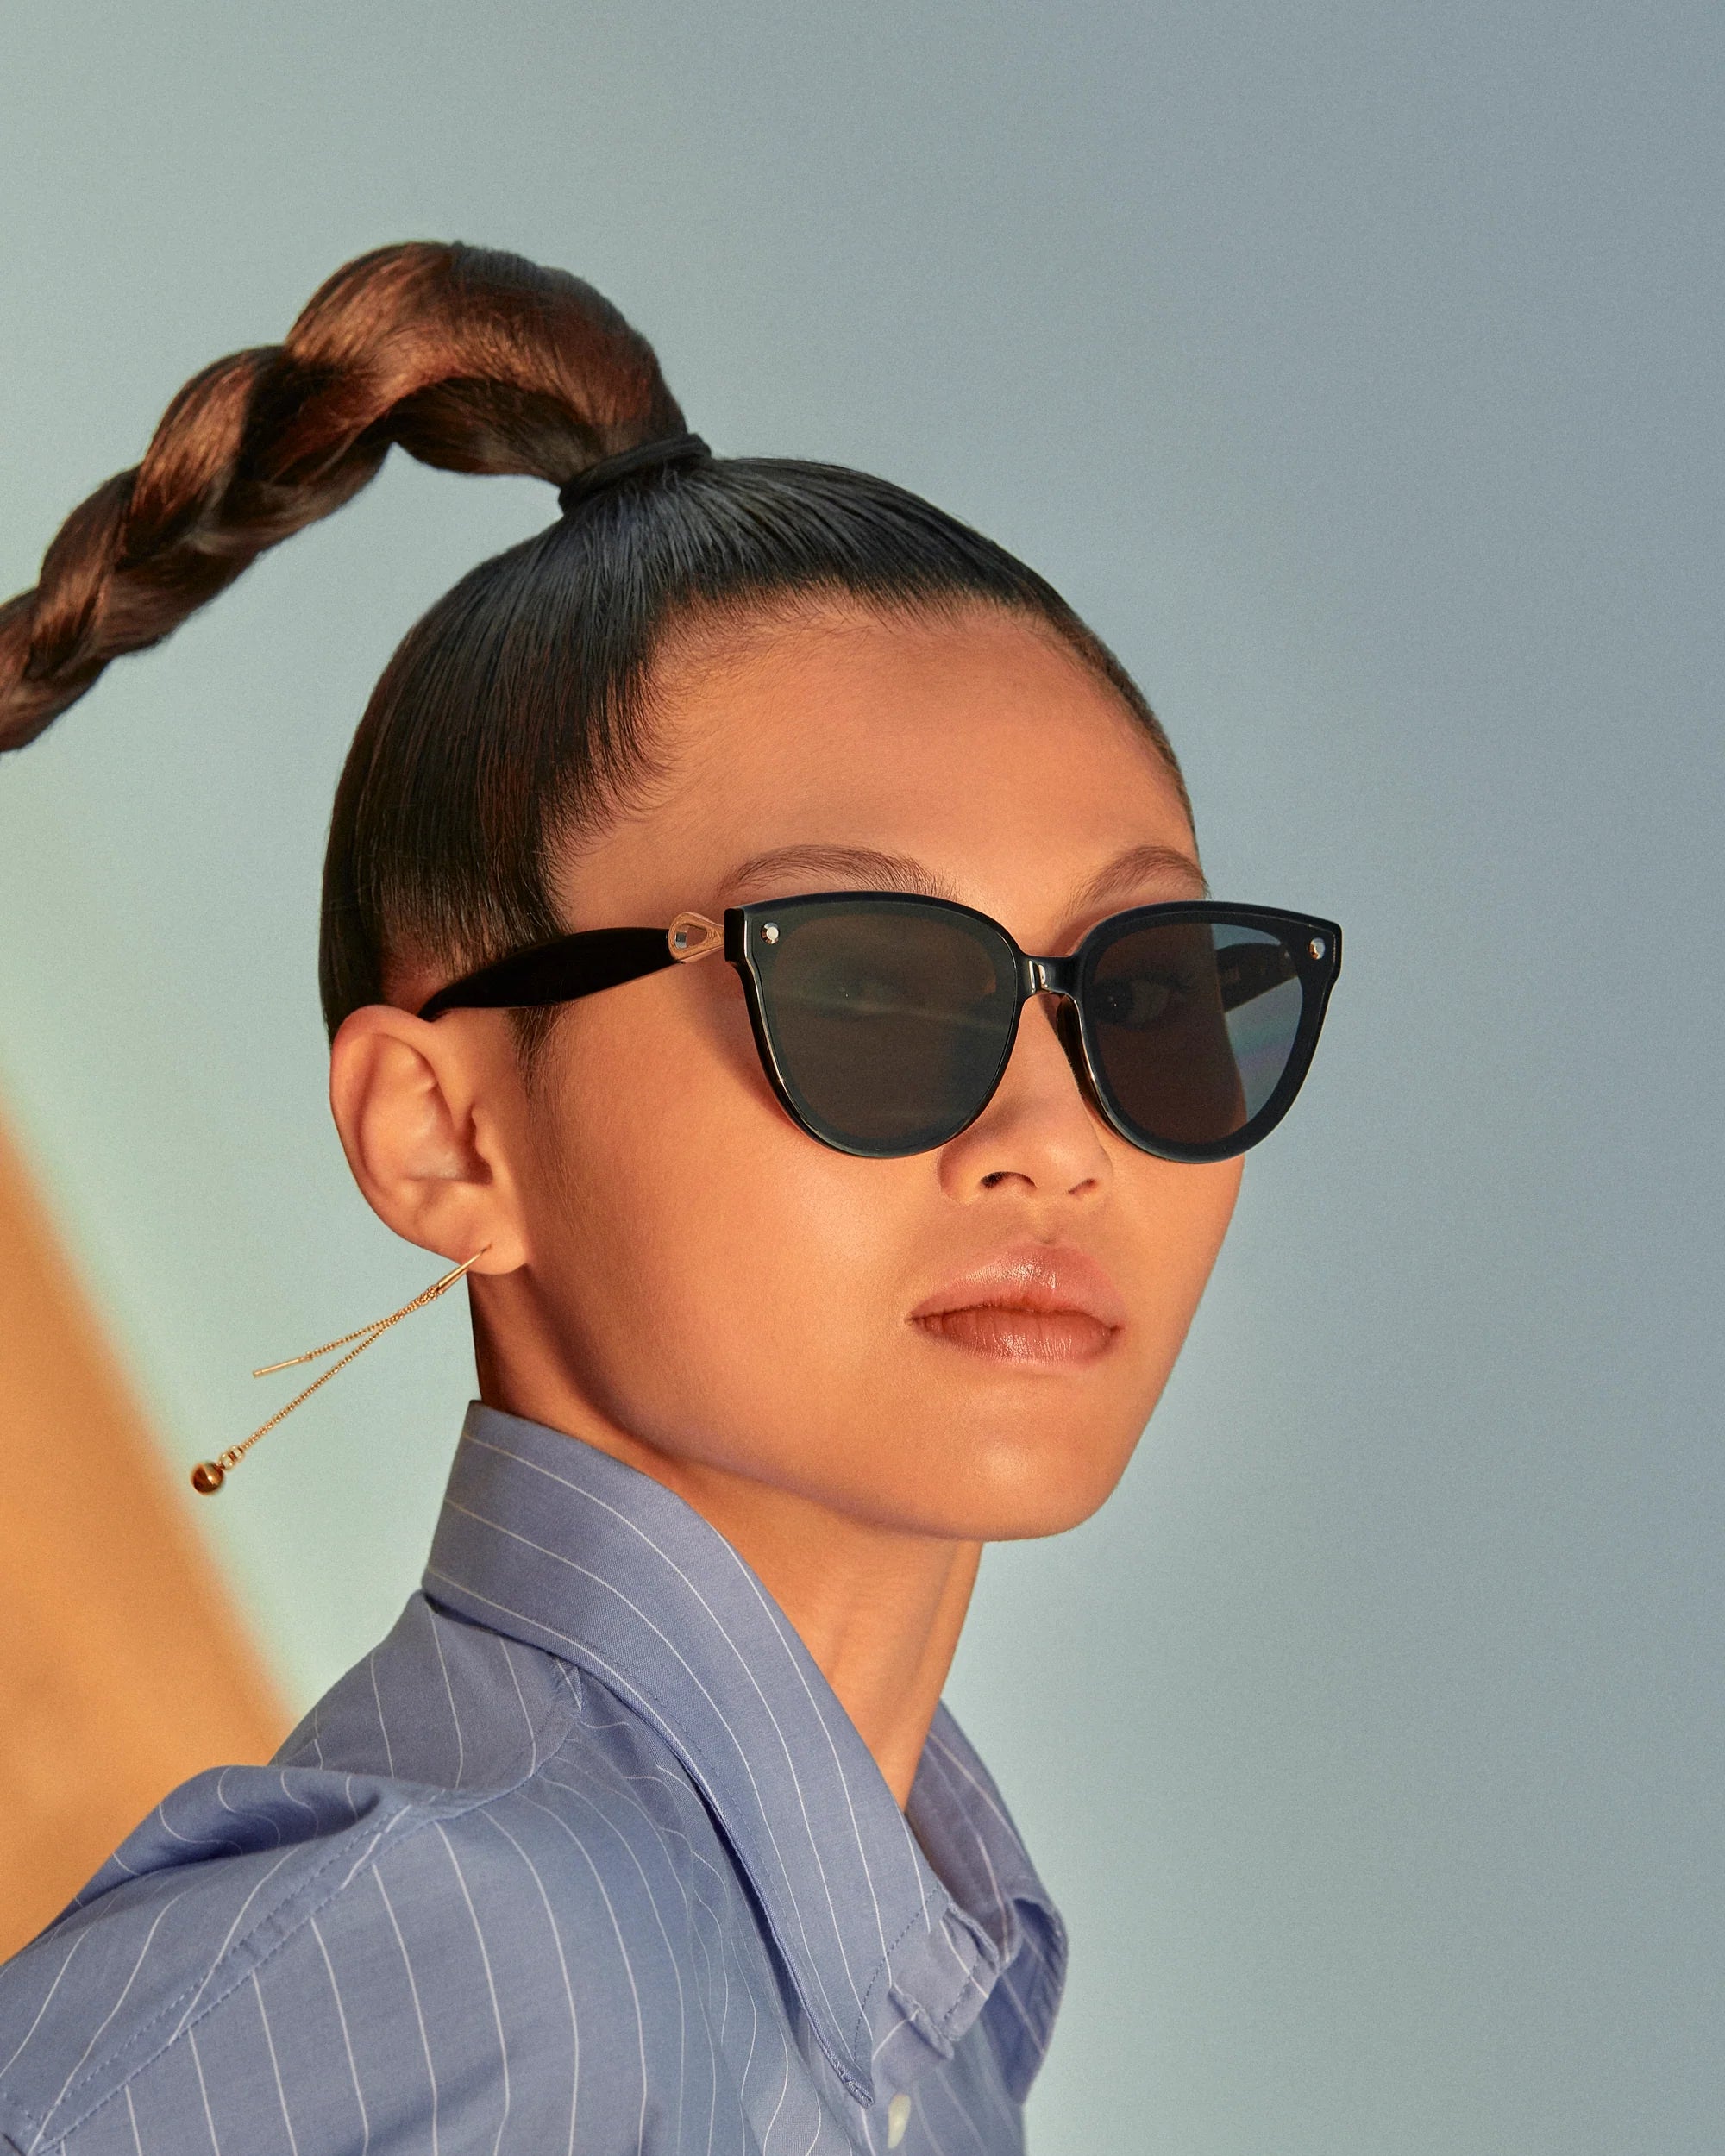 Image showing NANA sunglasses, primarily crafted from acetate. Versatile style suitable for everyday wear, combining fashion and comfort seamlessly.